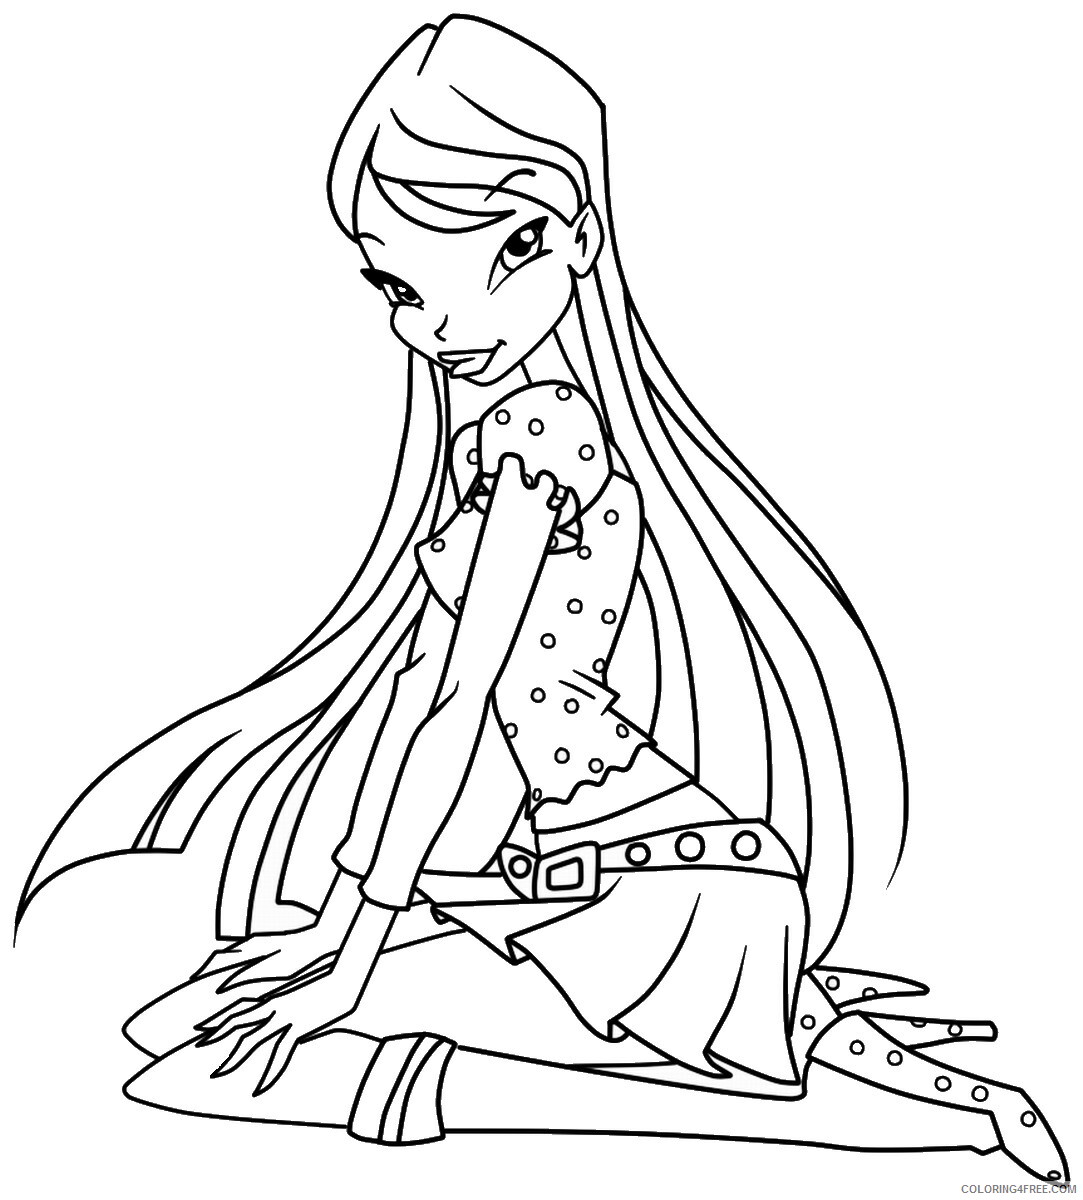 Winx Coloring Pages TV Film winx_cl_04 Printable 2020 11367 Coloring4free